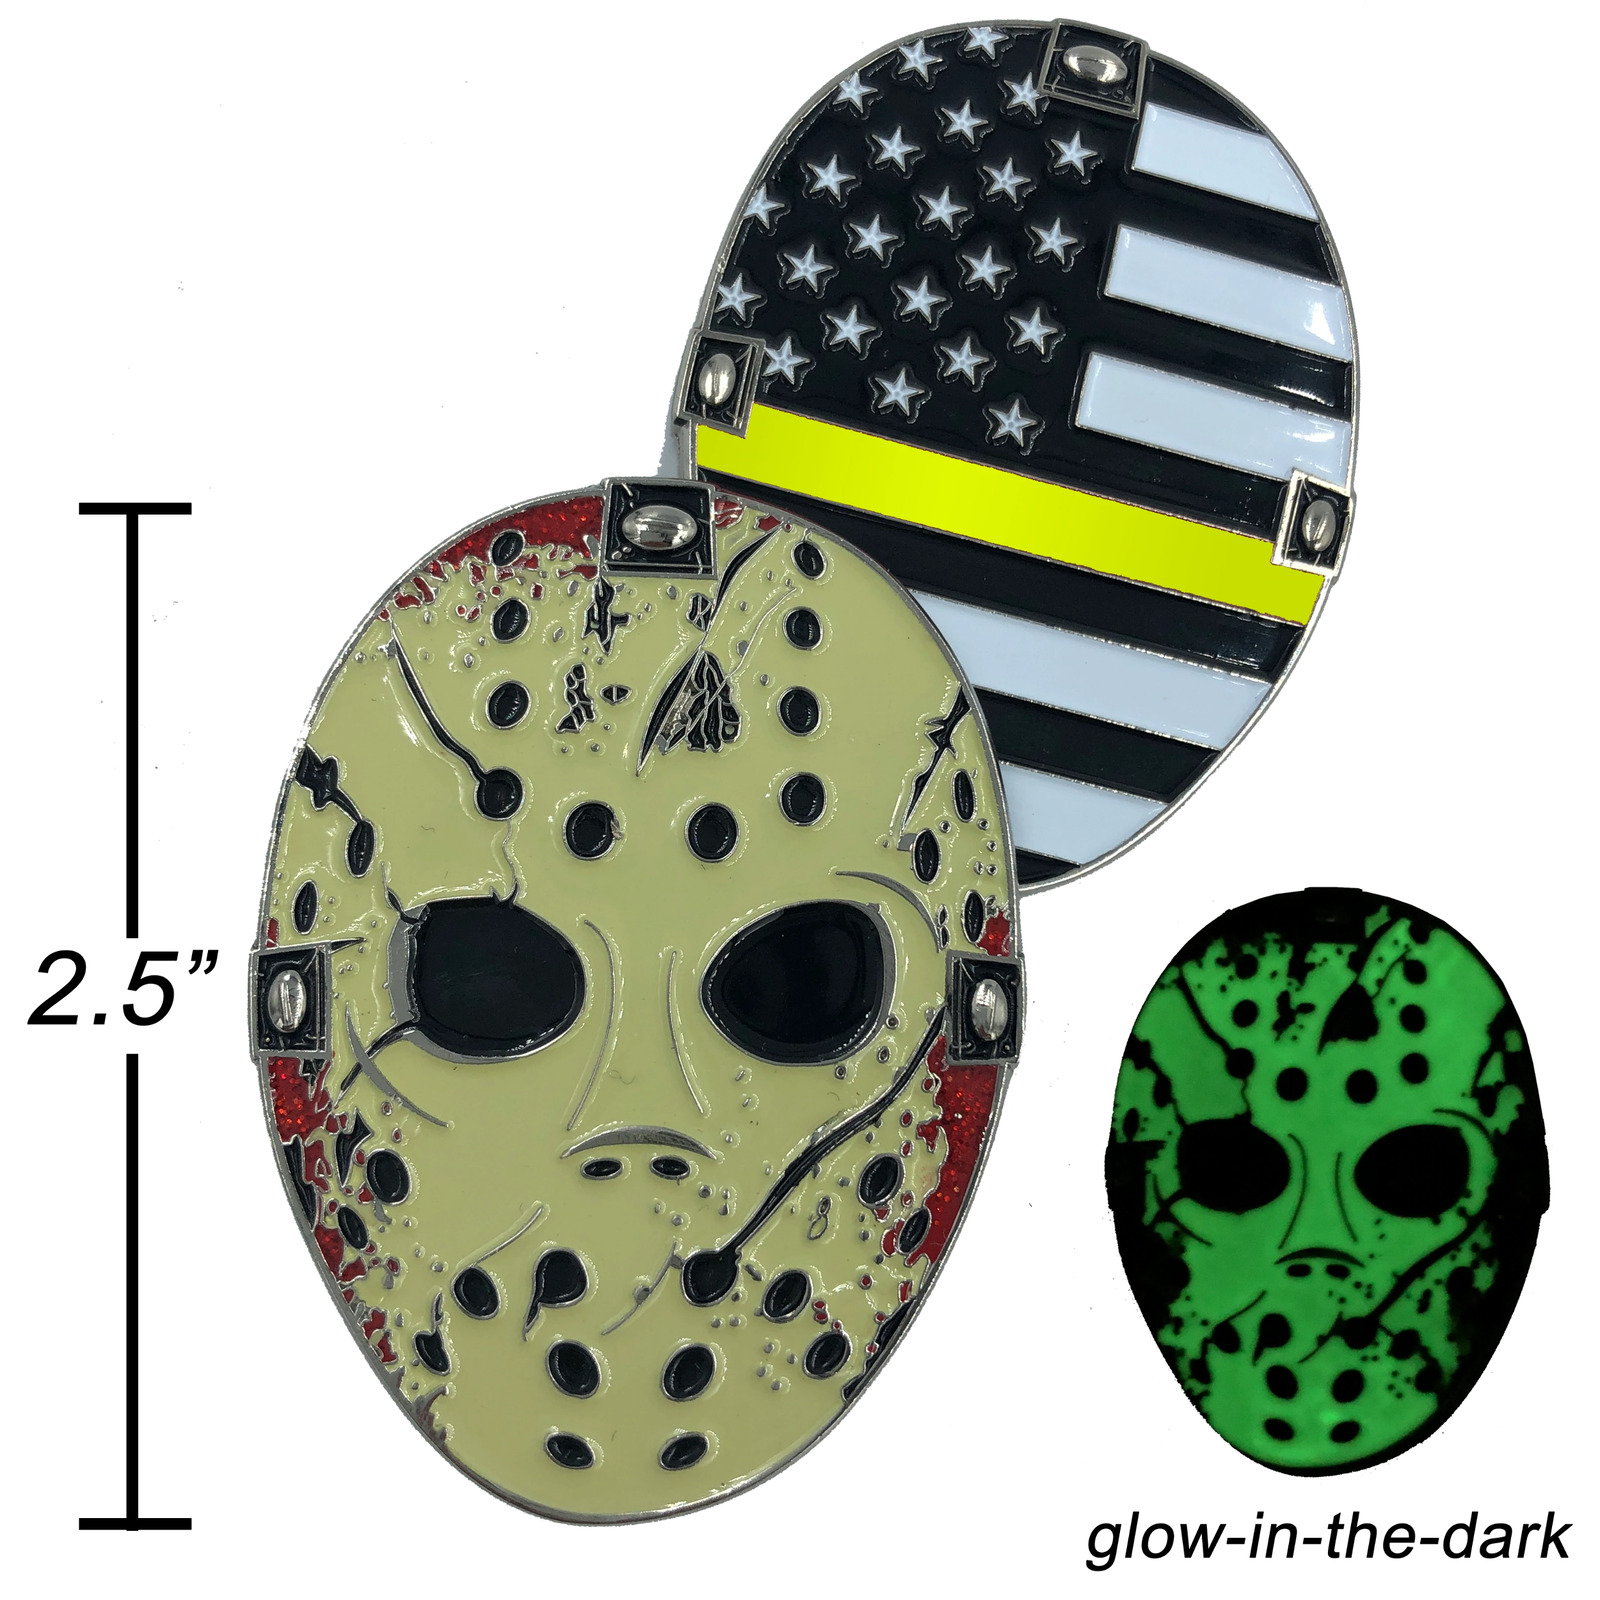 F-022 Thin Gold Line Jason Voorhees Challenge Coin Friday the 13th 911 Emergency